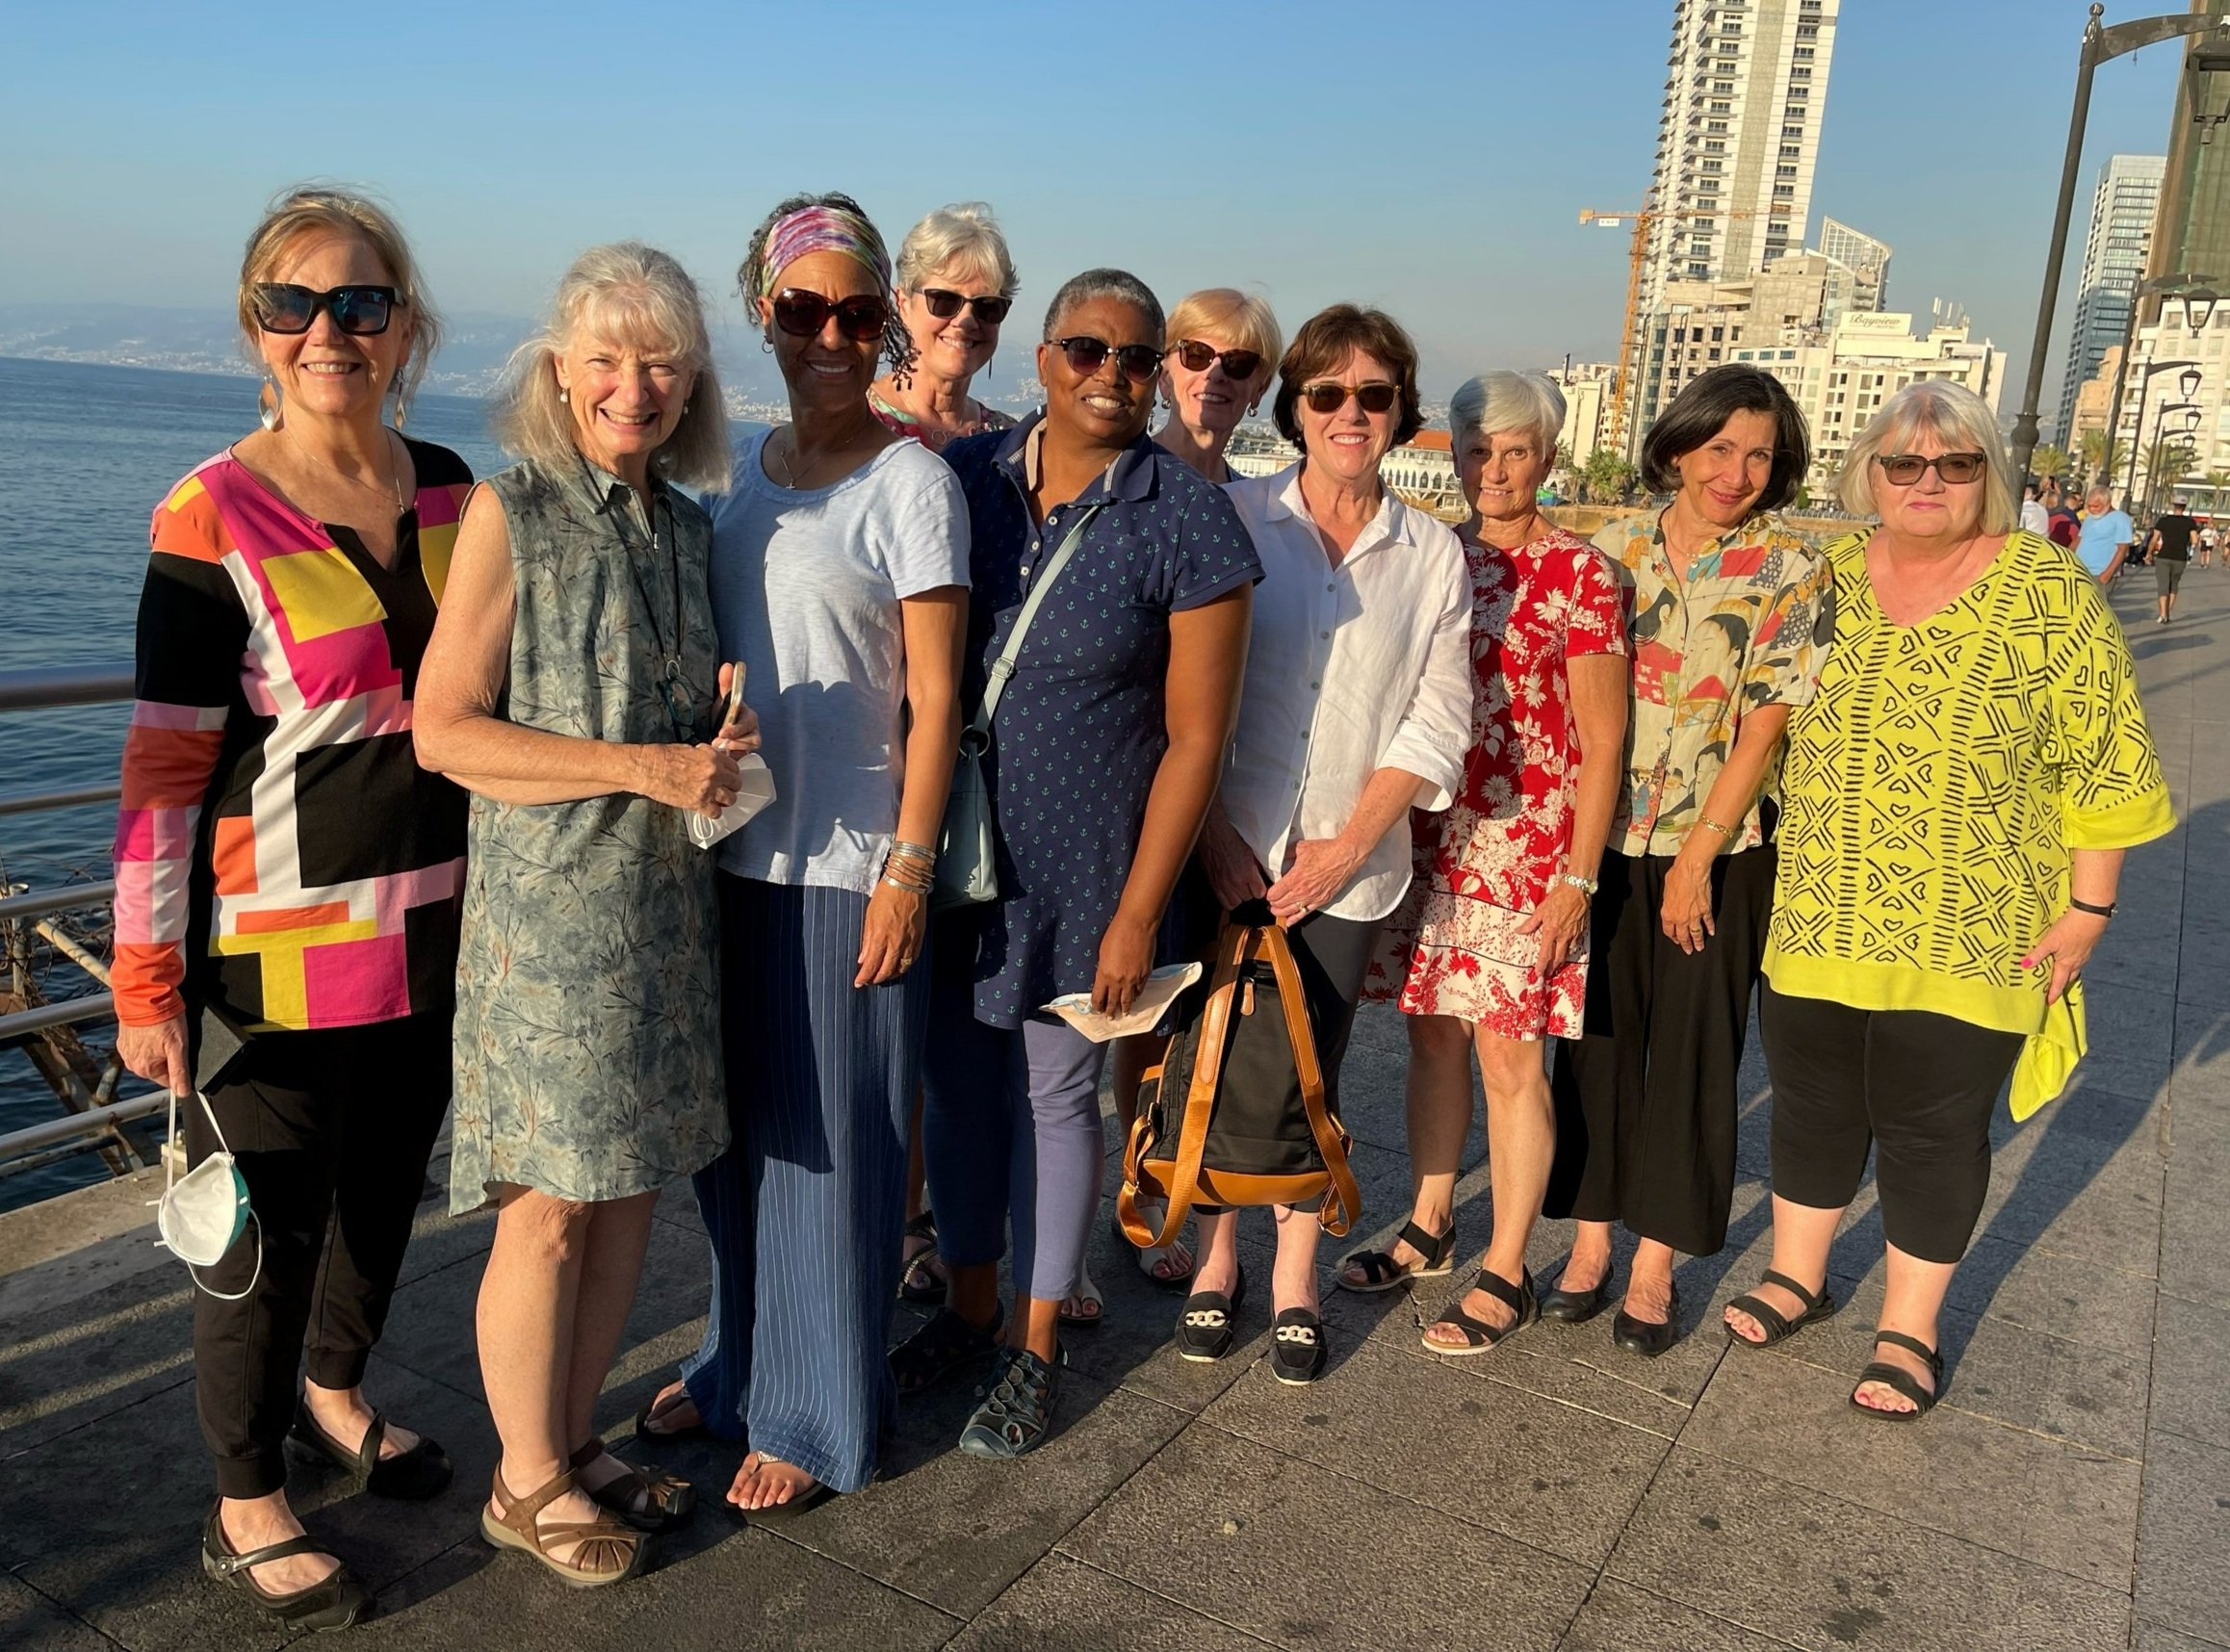   Headed to dinner along the Corniche - the picturesque promenade that runs along the Mediterranean: (left to right) Barbara Chandler, Mona Lee, Annette Brewer, Toby Mueller, Renata Dennis, Christi Ensch, Susan Henry, Lois Andrews, Lisa Culpepper, Ma